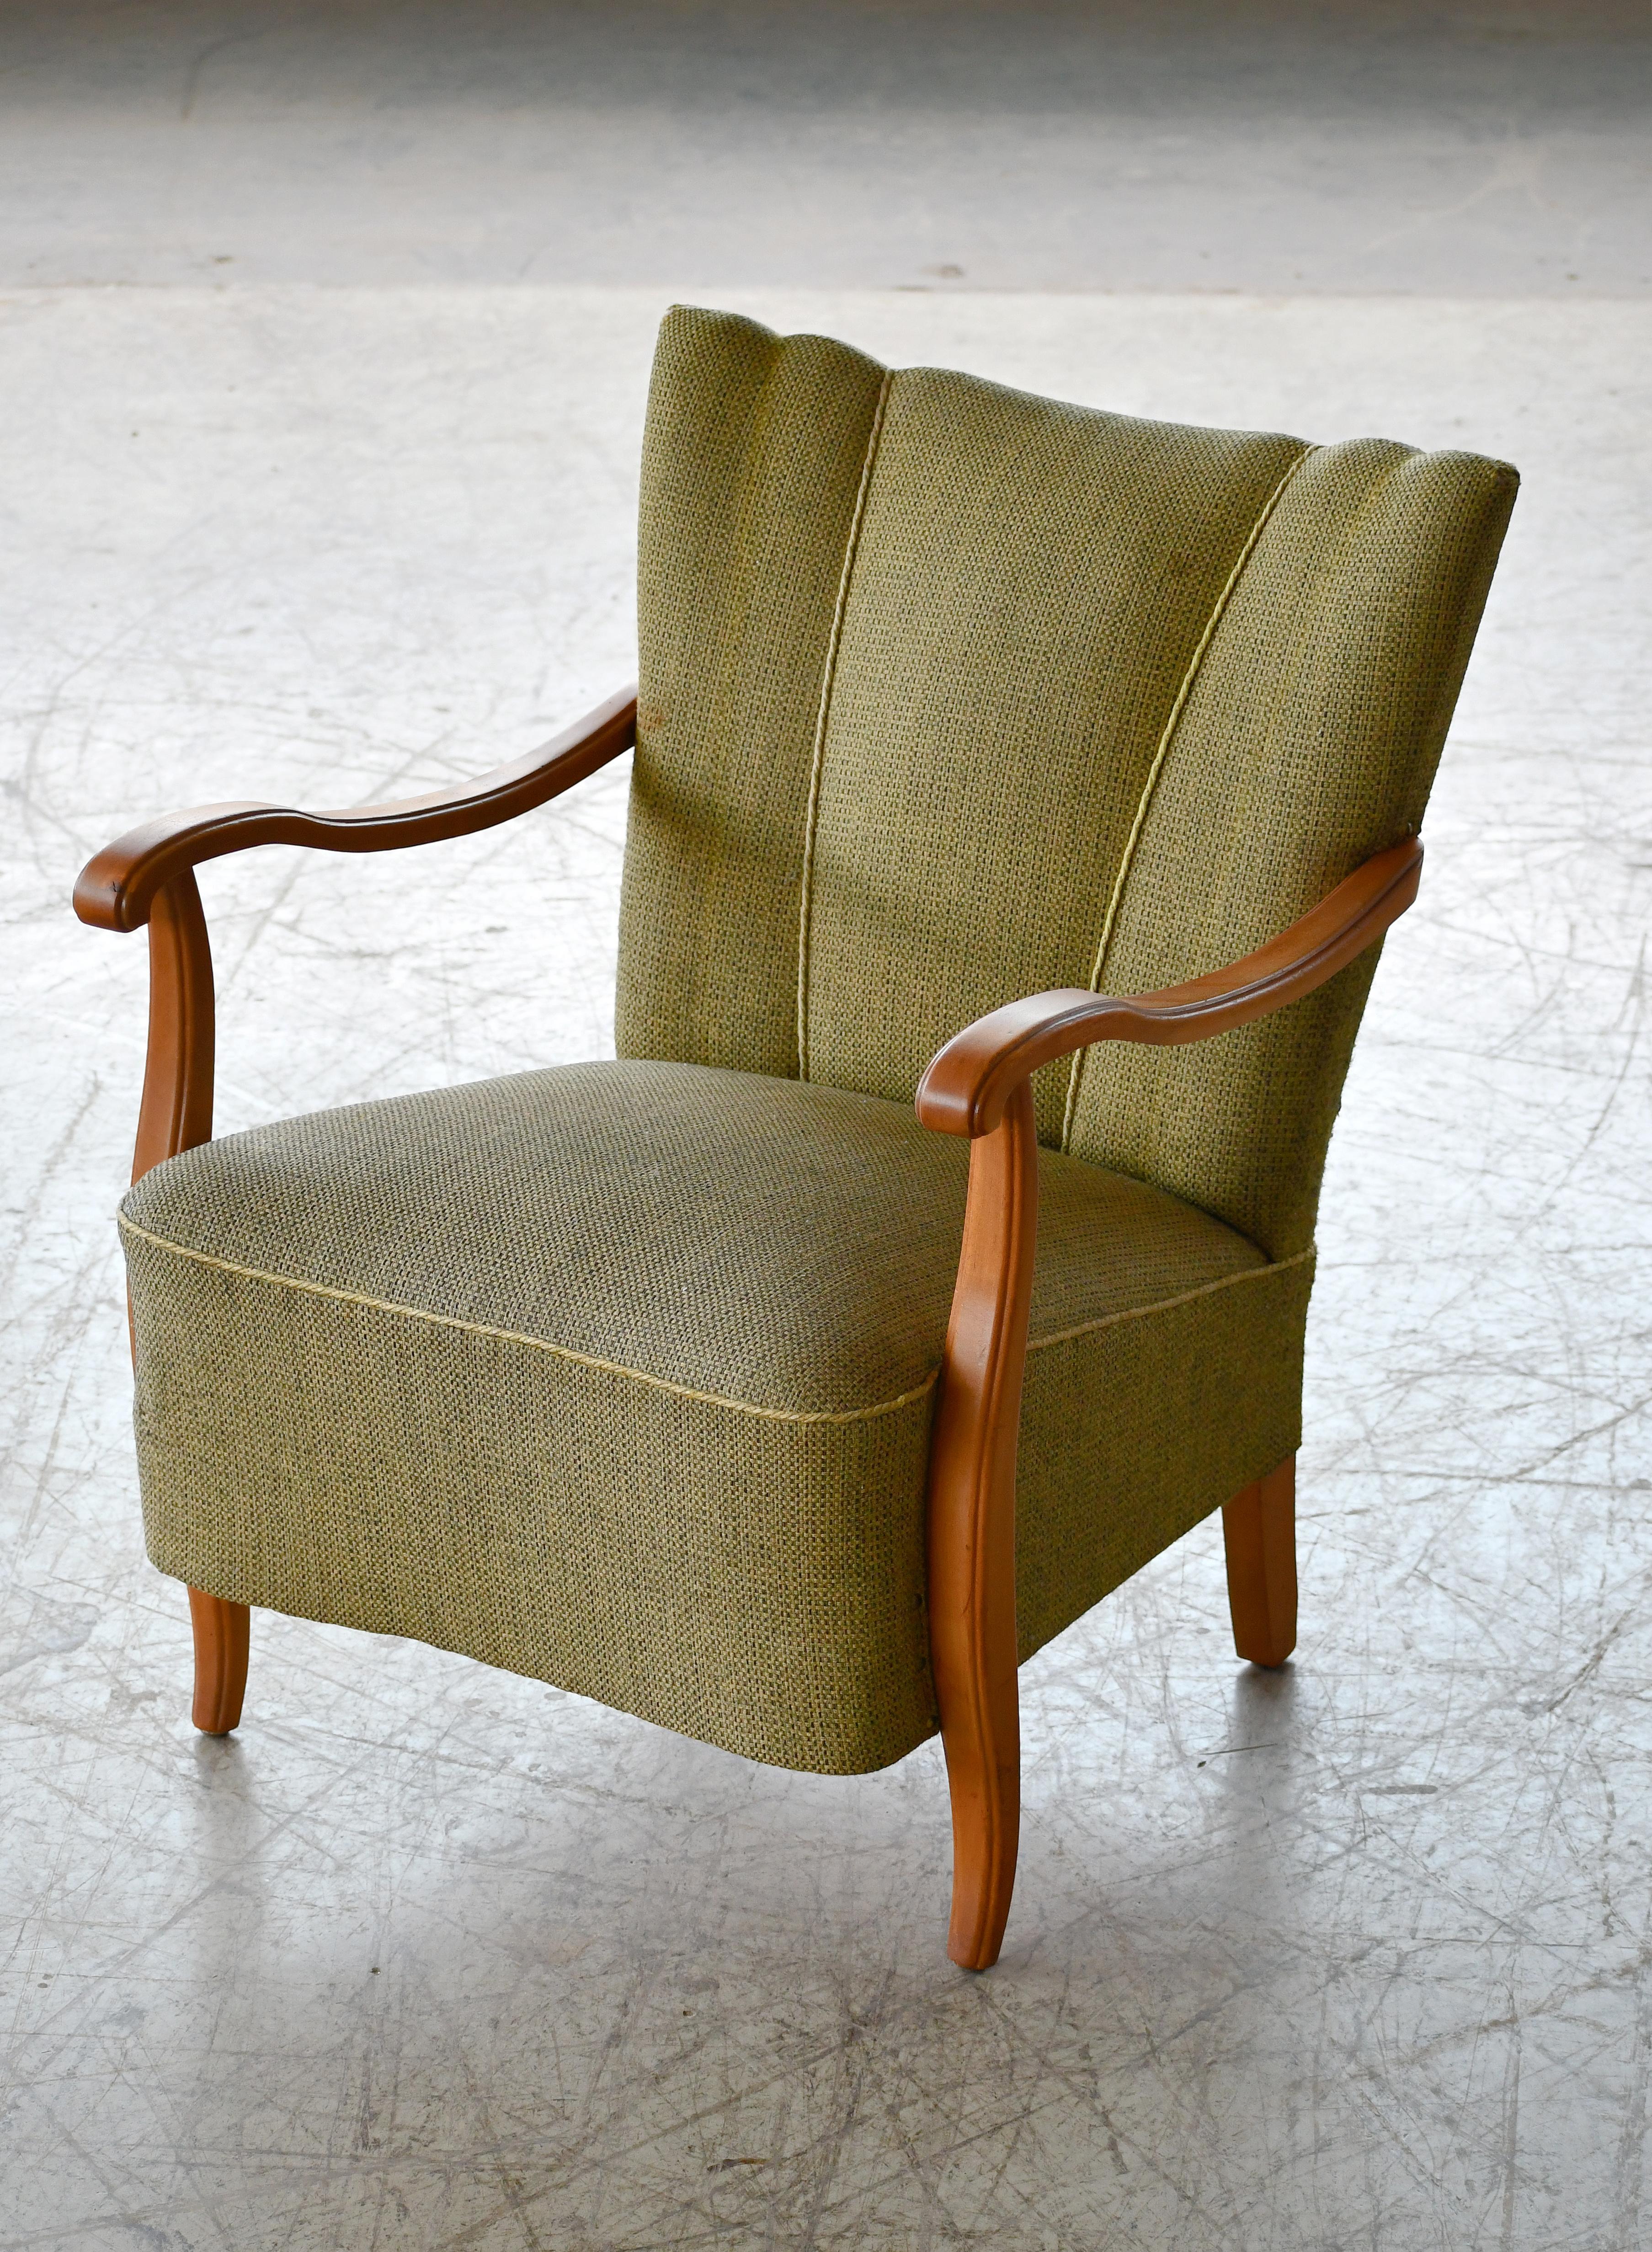 Charming easy chair with open armrests in the style of Fritz Hansen and made in the 1940s. These type of 1940s chairs are increasingly coming into vogue. Made from solid maple with nicely sculpted/carved armrests and spring coils in the seat and